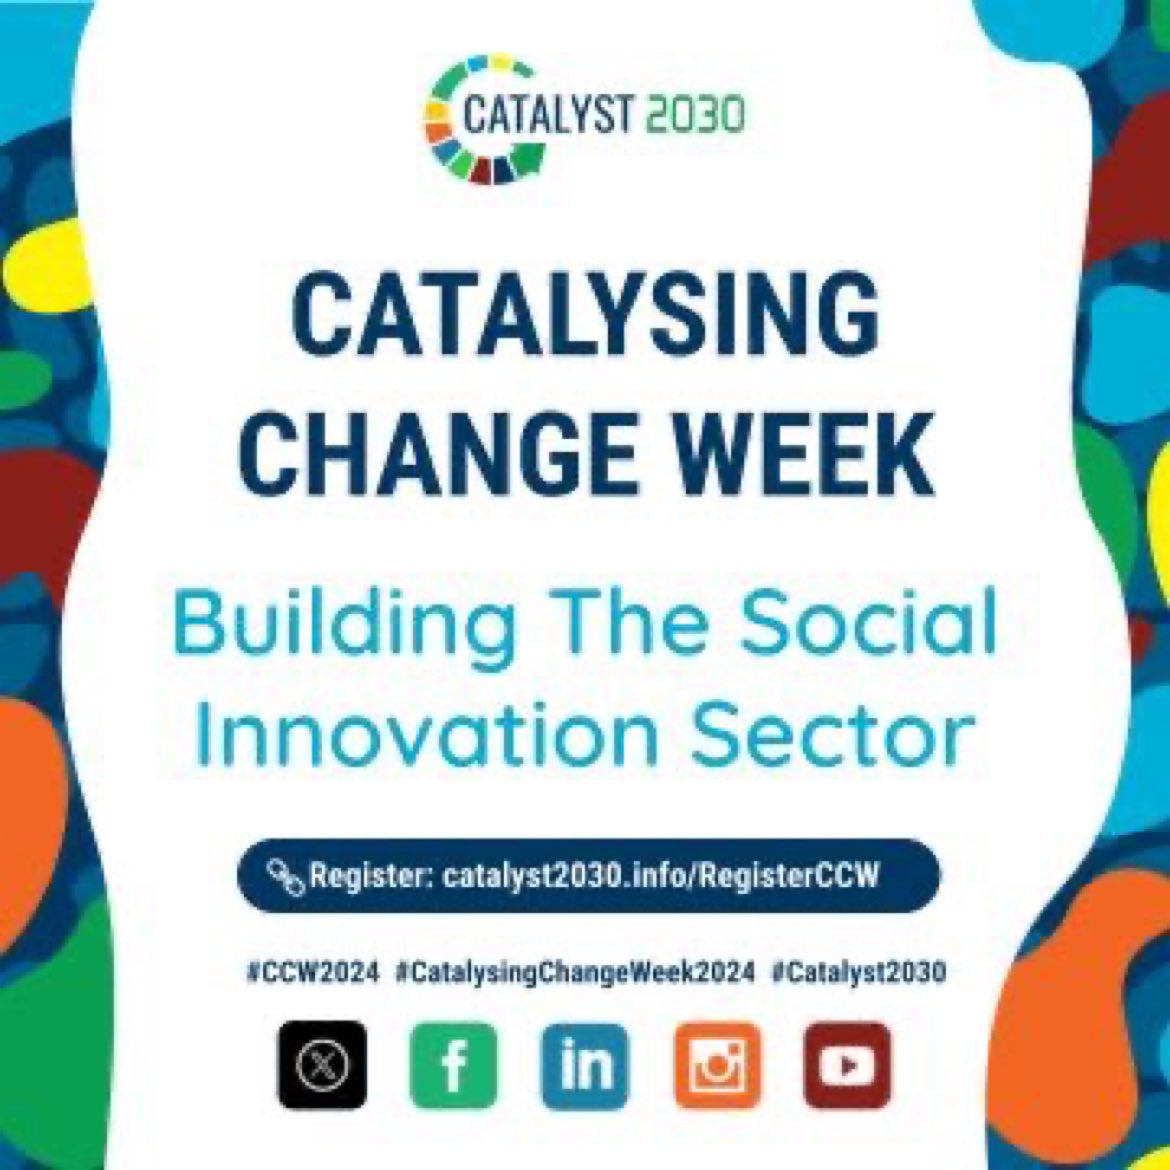 Guys don’t miss the Catalysing Change Week where global leaders unites for an unforgettable social innovation experience!  

Don't miss out - register here now: catalyst2030.info/RegisterCCW 😌.
#CatalysingChange #Catalyst2030